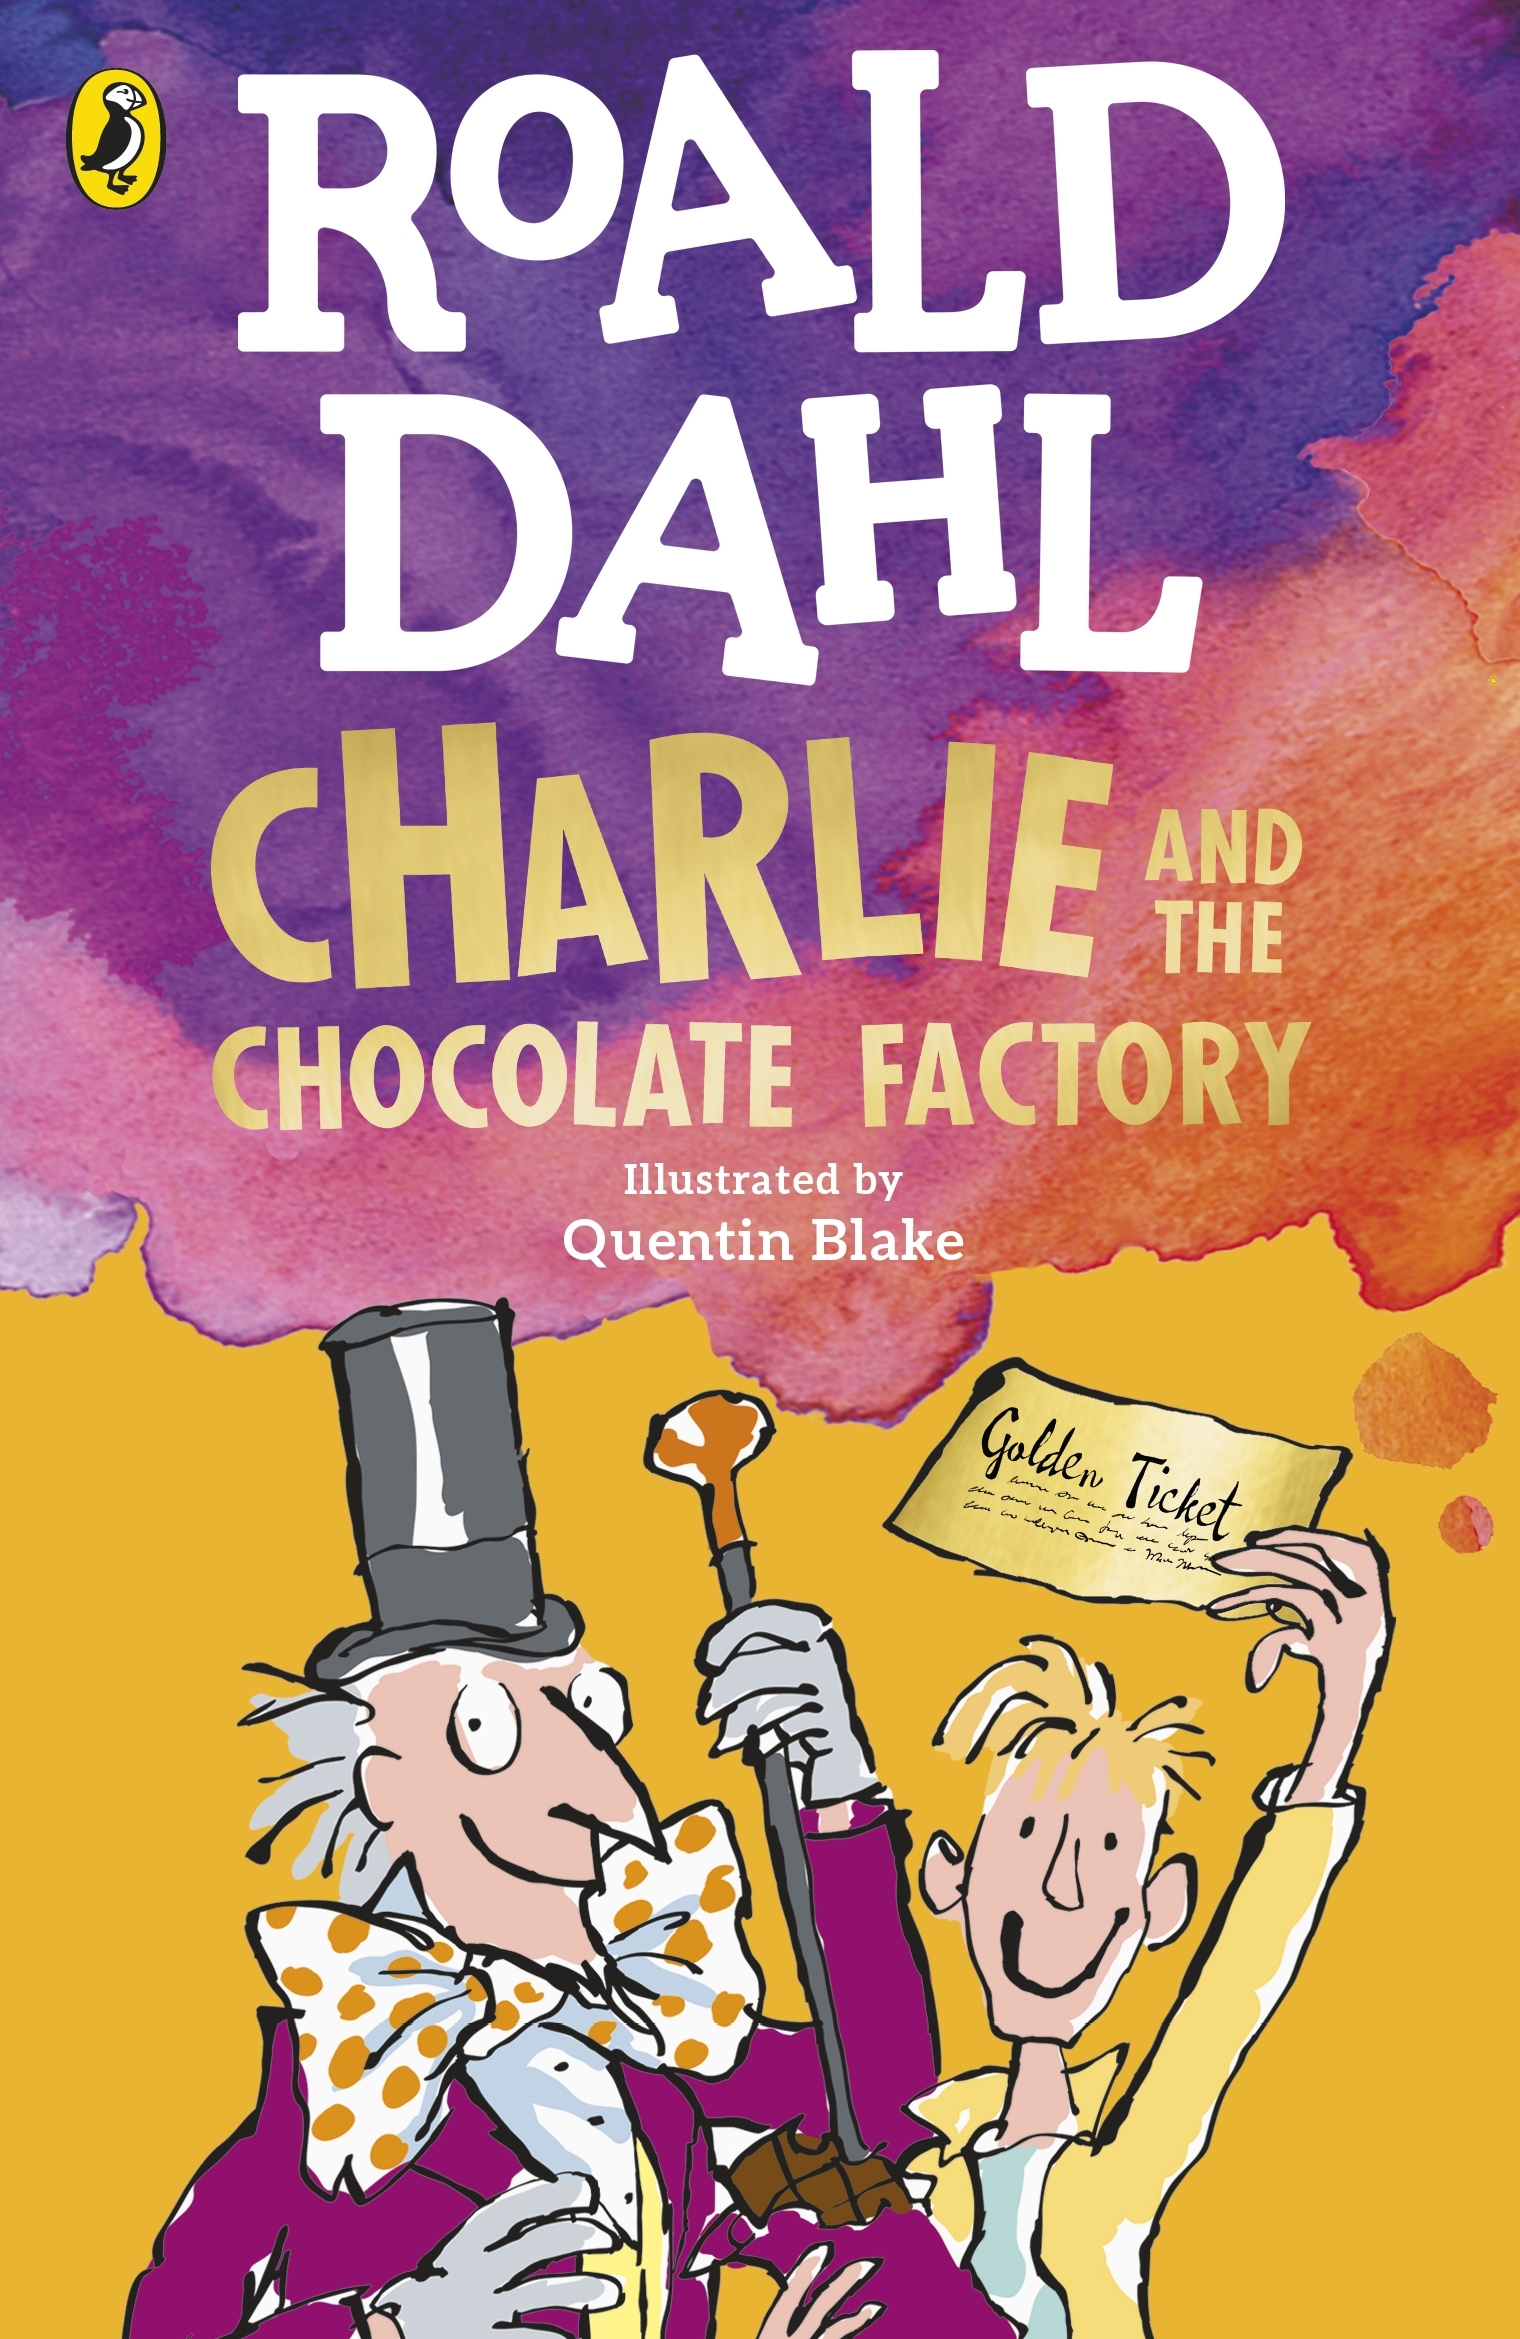 book review for charlie and the chocolate factory